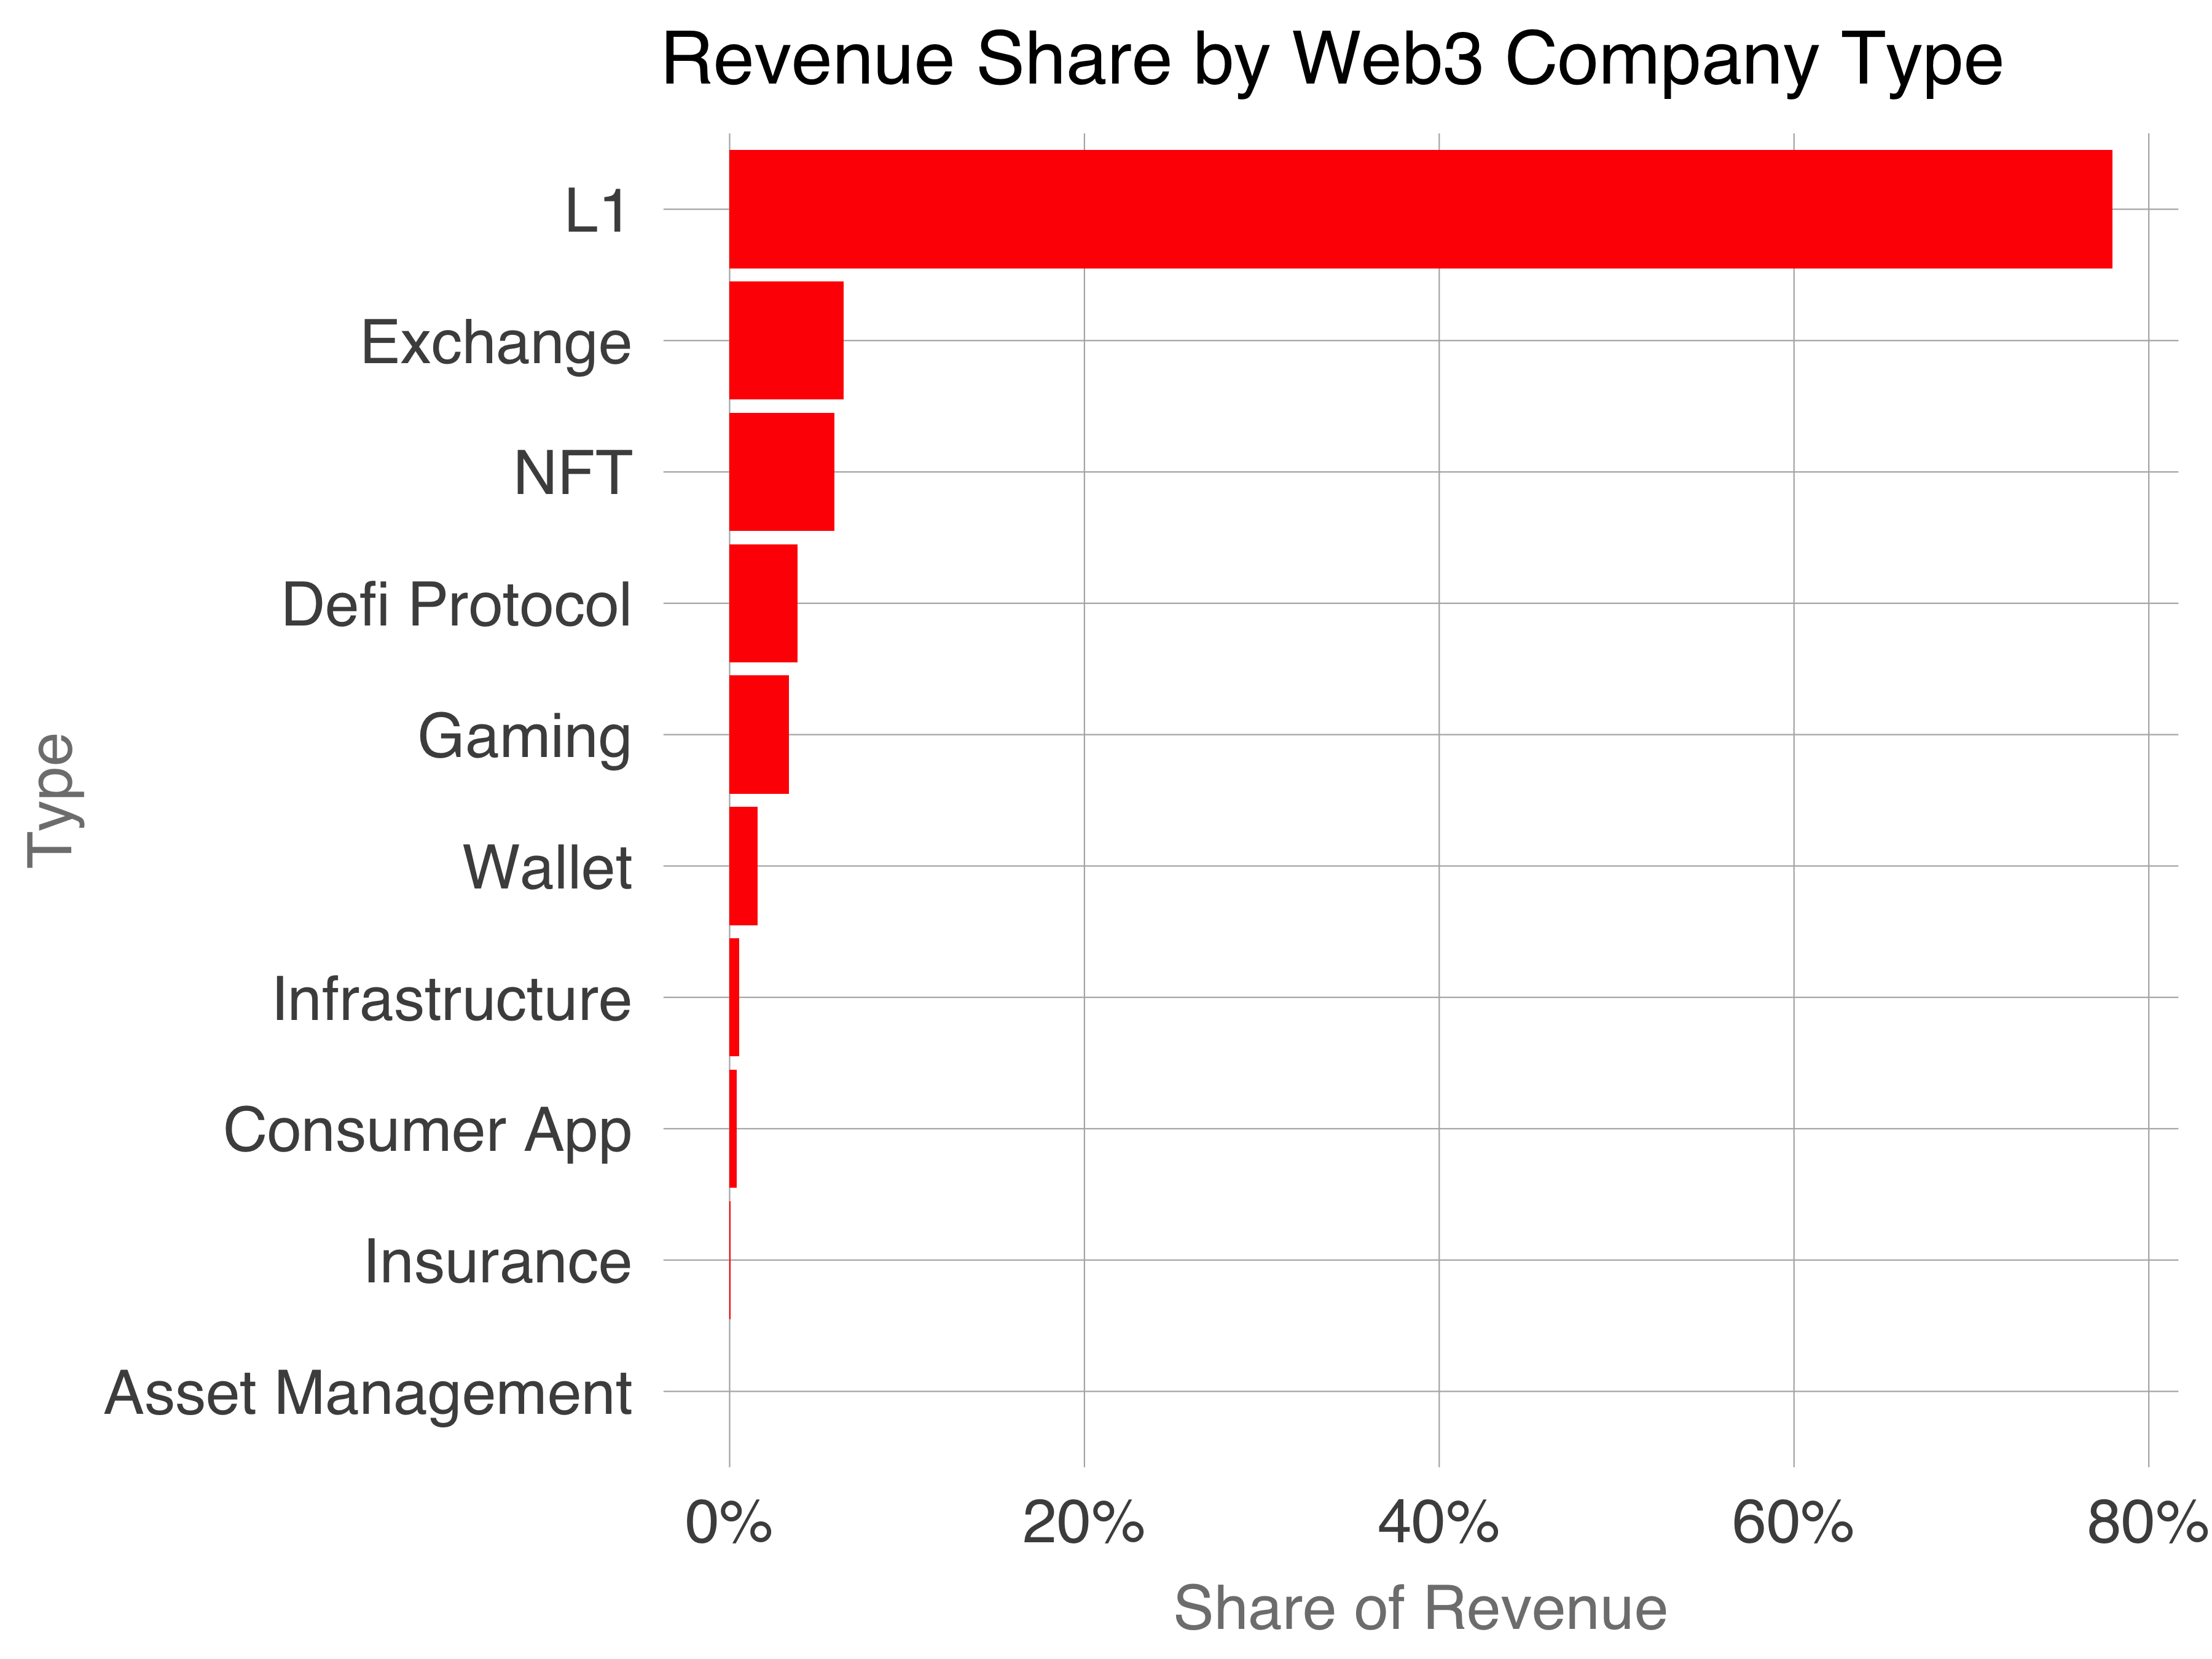 A red and white colored graph revenue of revenue shared y web 3 company type